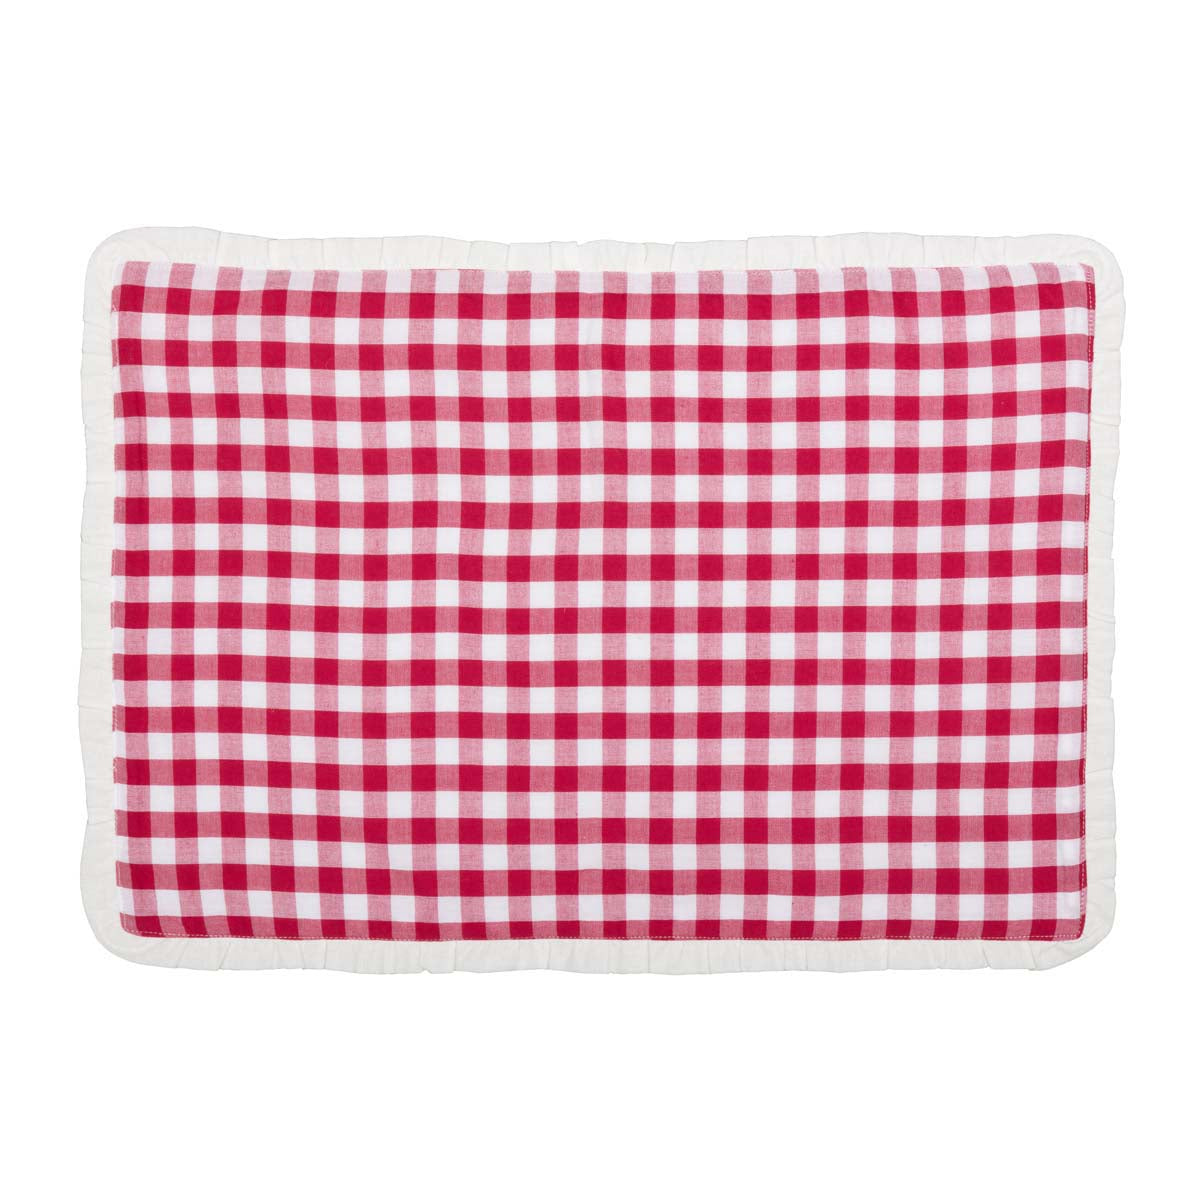 Emmie Red Placemat Set of 6 12x18 VHC Brands